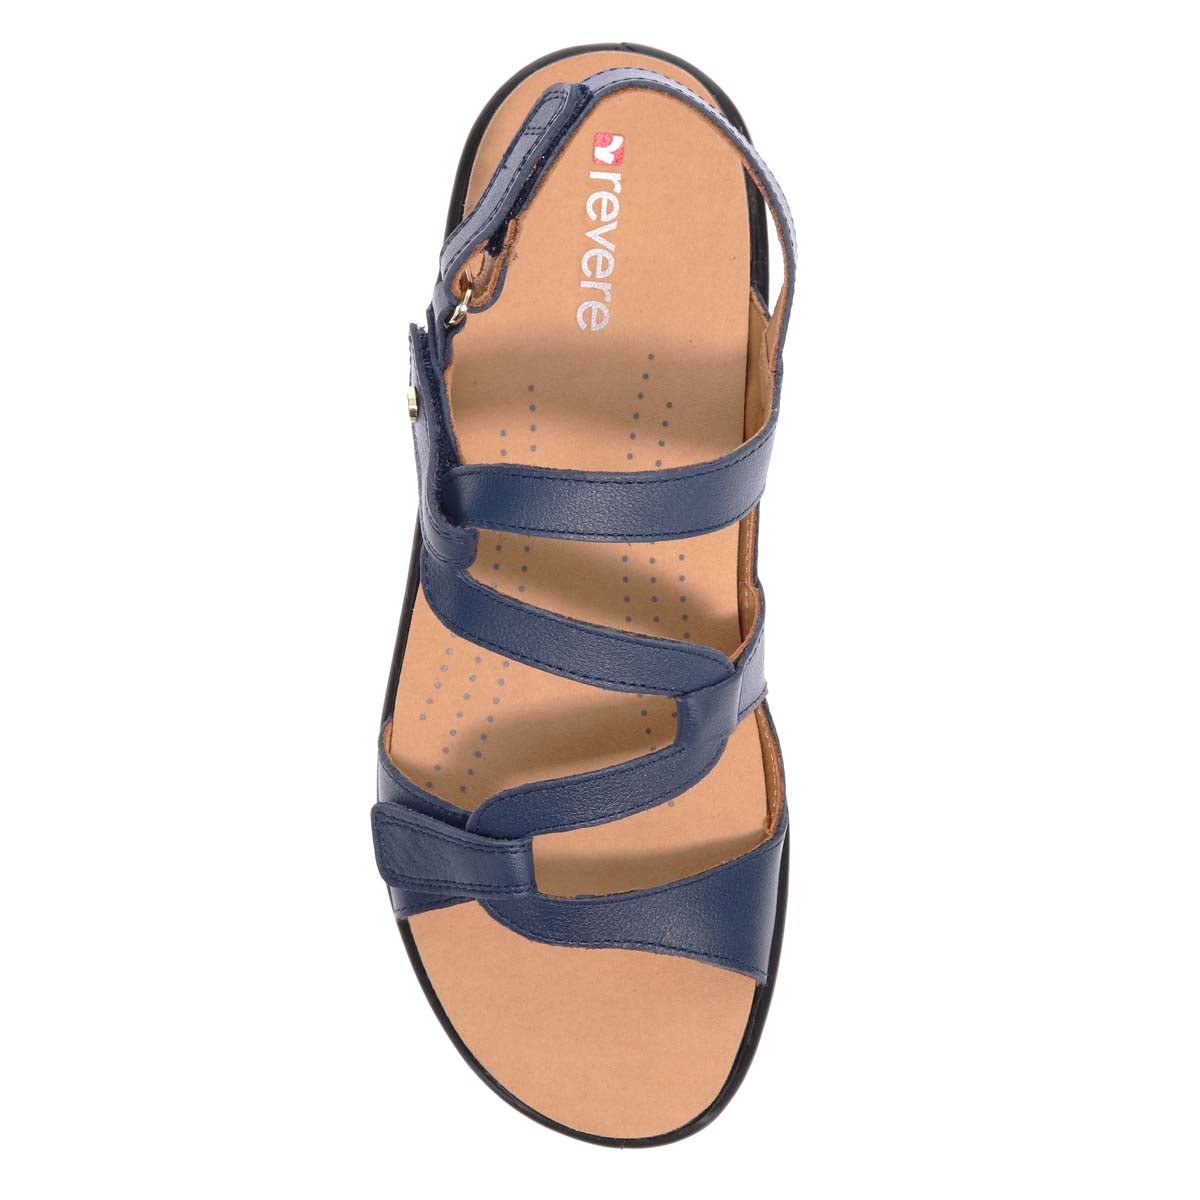 REVERE EMERALD WOMEN SANDALS IN BLUE FRENCH - TLW Shoes